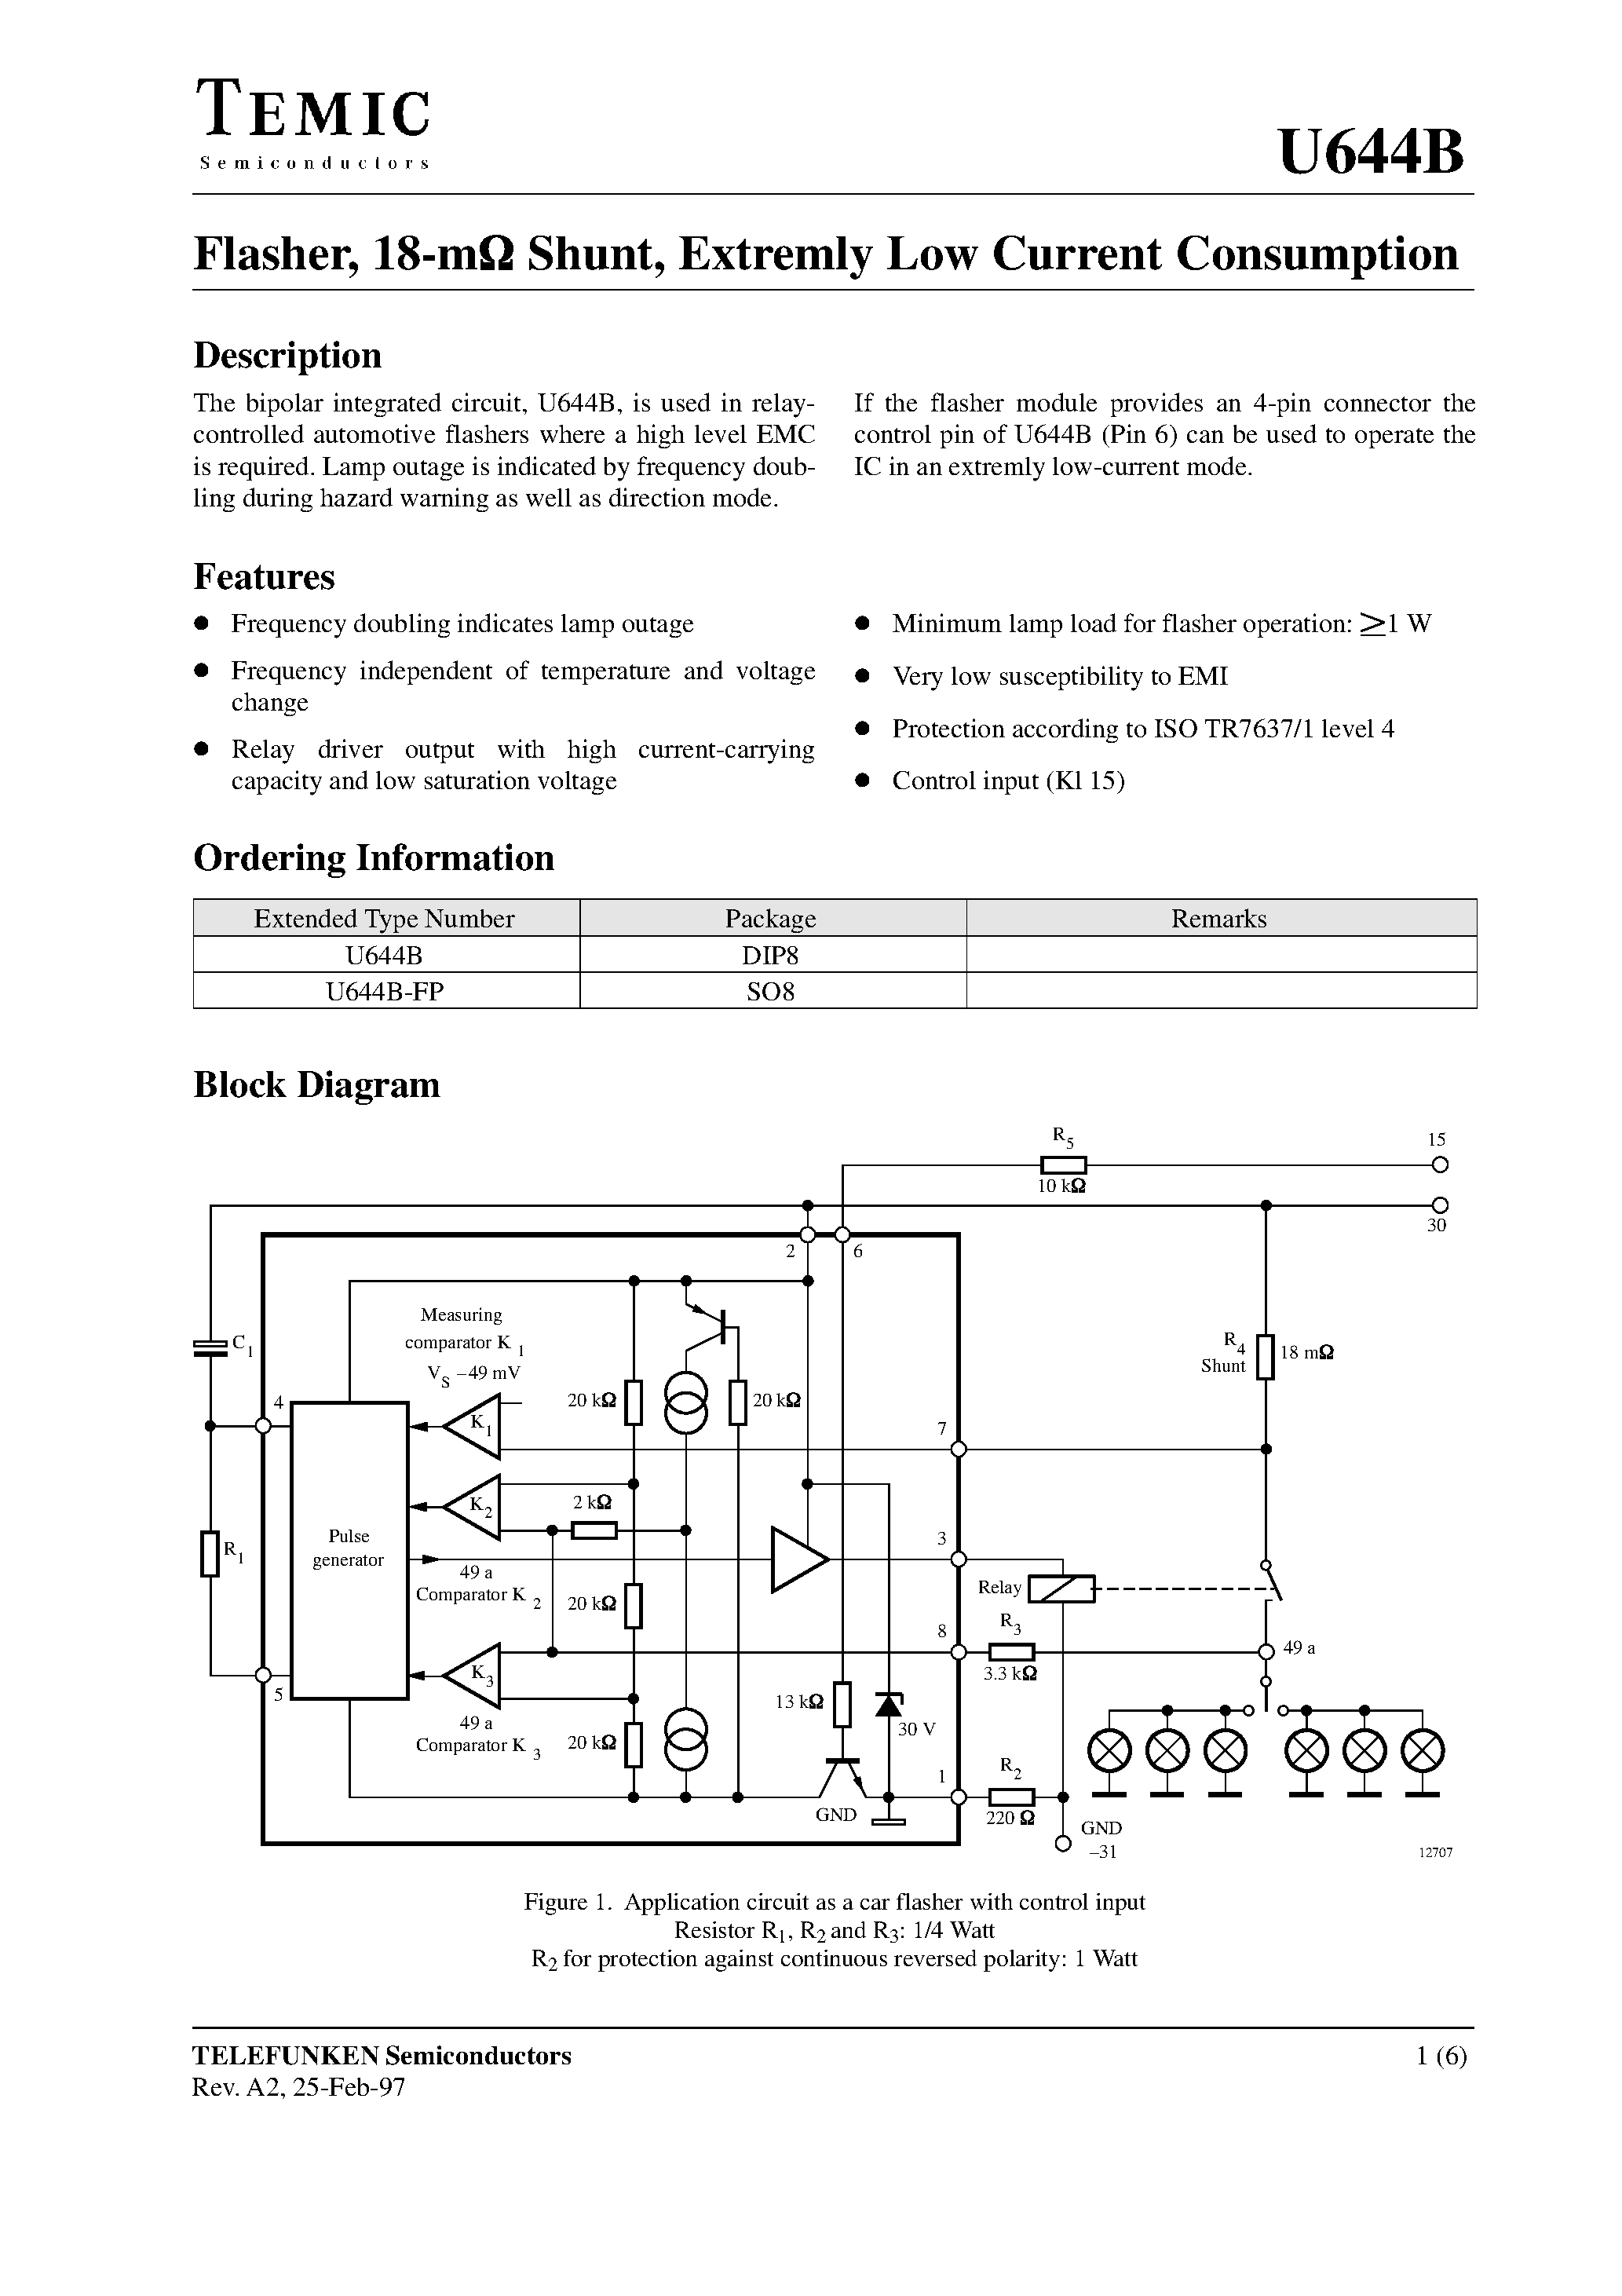 Datasheet U644B - Flasher/ 18-m Shunt/ Extremly Low Current Consumption page 1